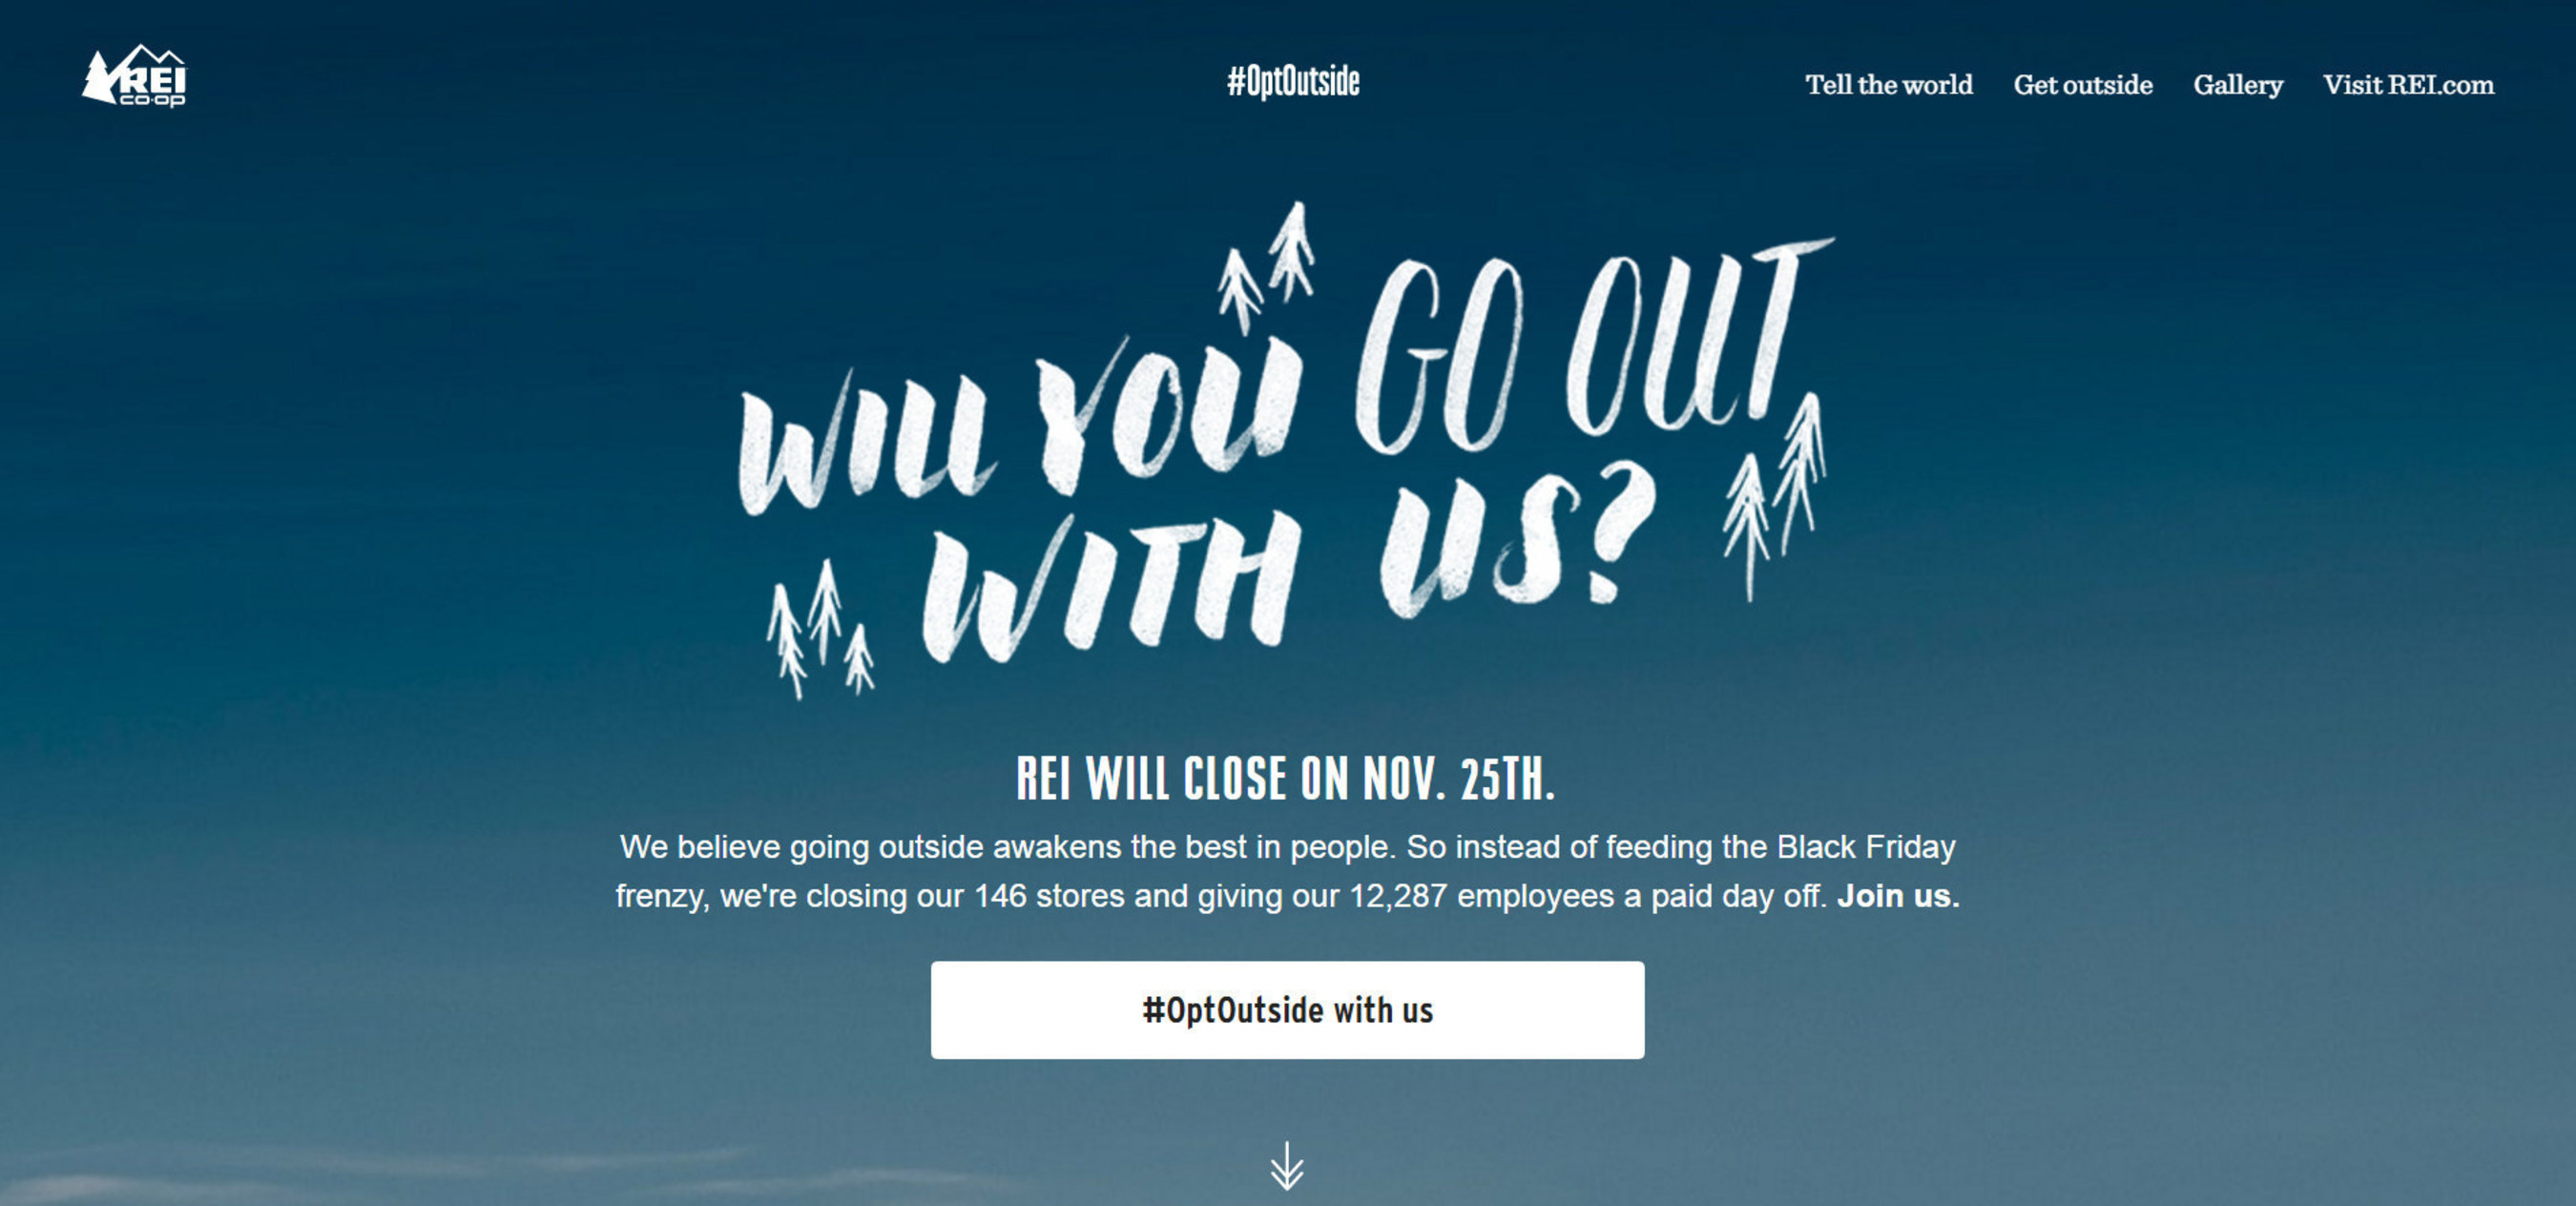 New outdoor activity finder launched at REI.com/opt-outside to help people reconnect with family and friends this holiday season and declare support